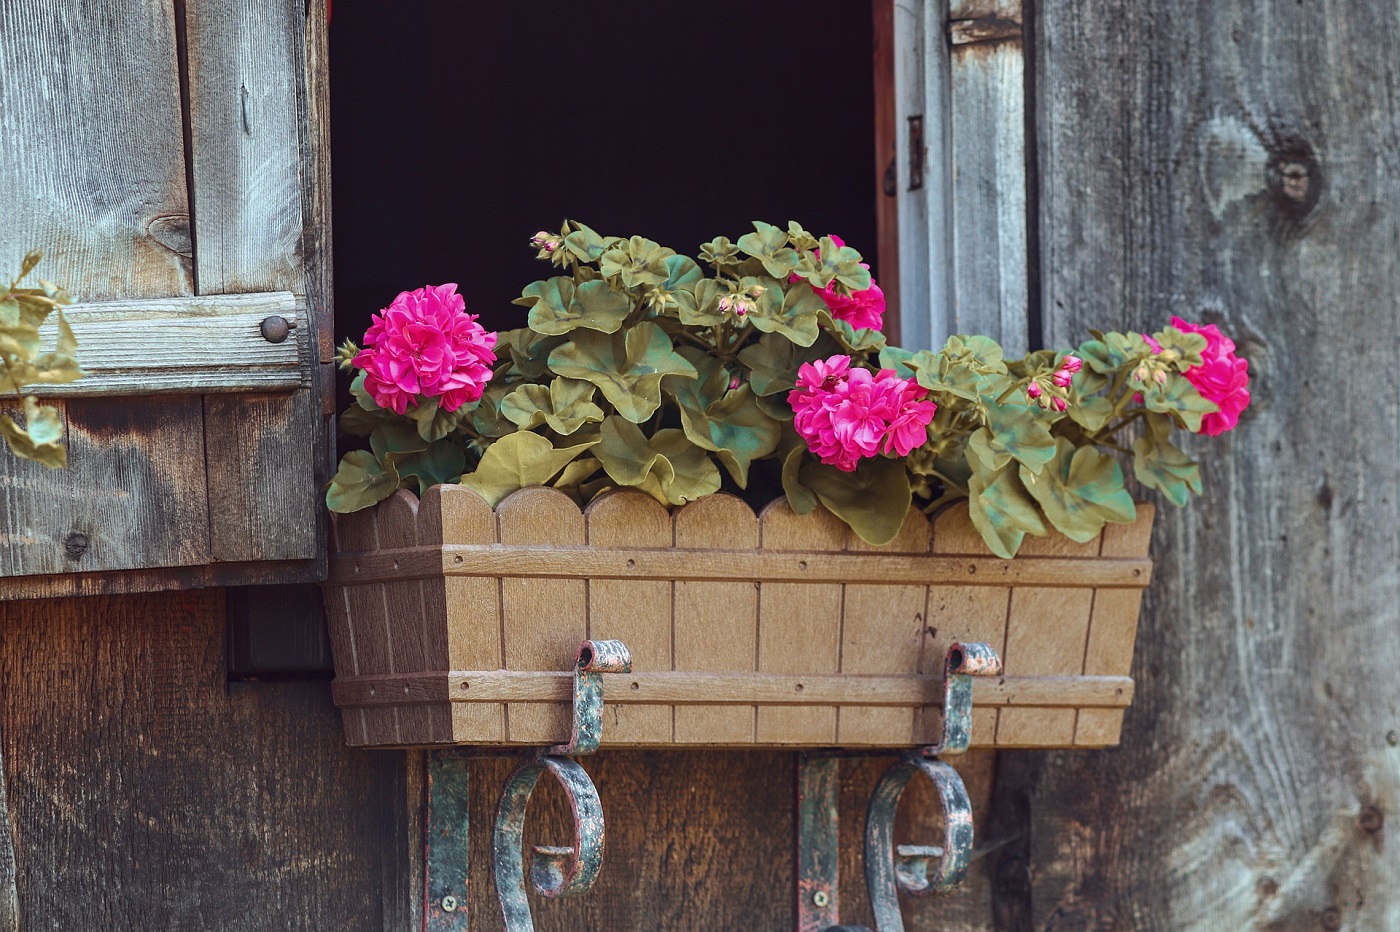 Flower box inn window holding pink carnations. Image from Pixabay.